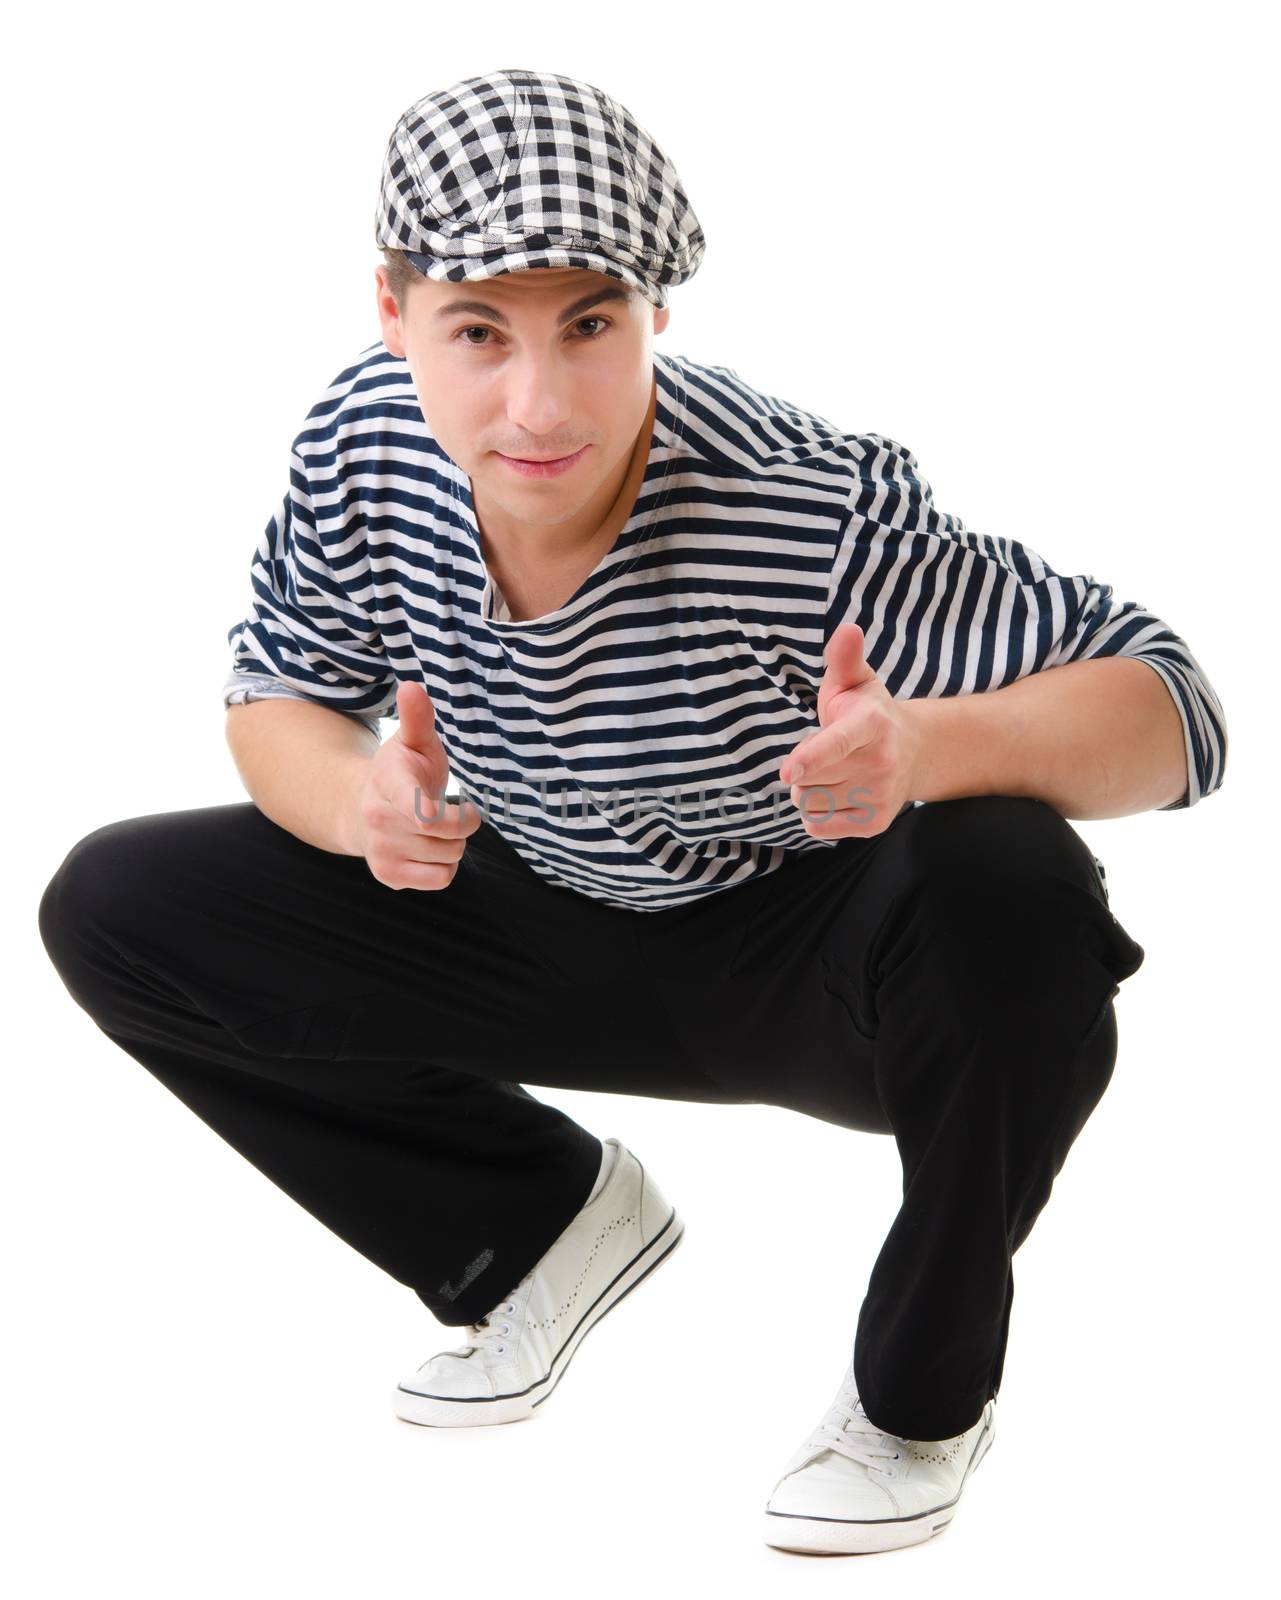 Thumbs up! by look naughty handsome young man in stylish striped dress and cap with suitcase